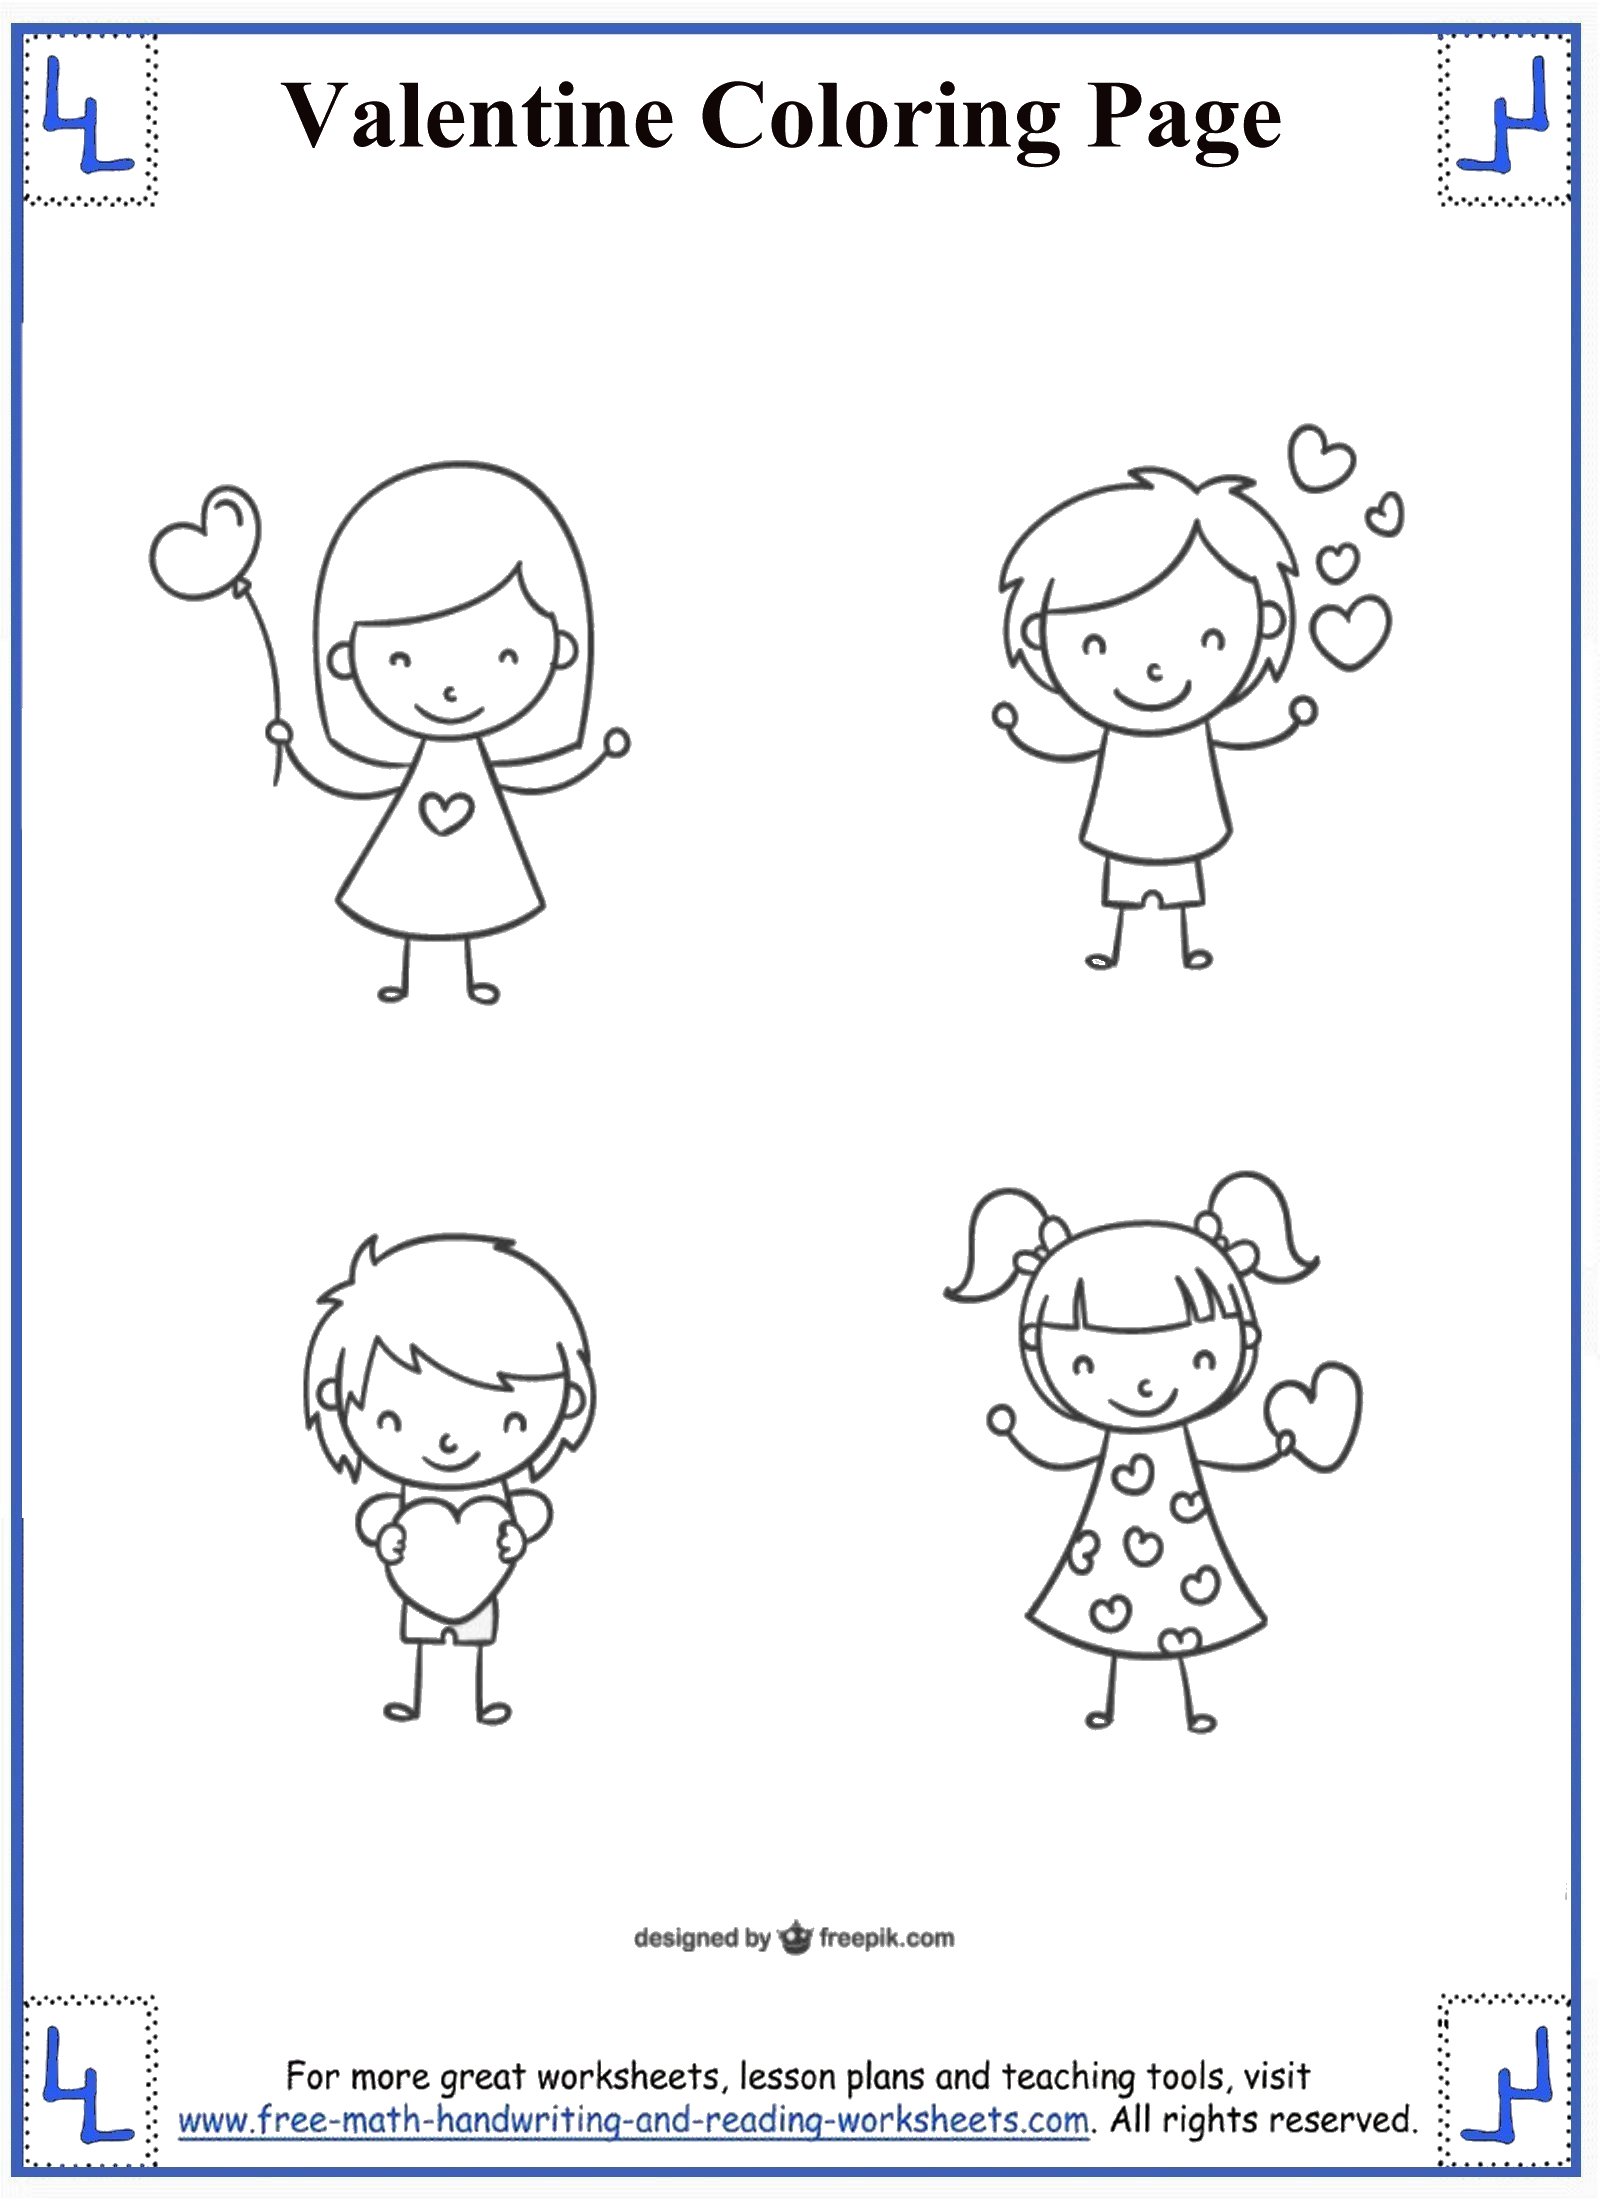 valentine coloring pages and activities - photo #50